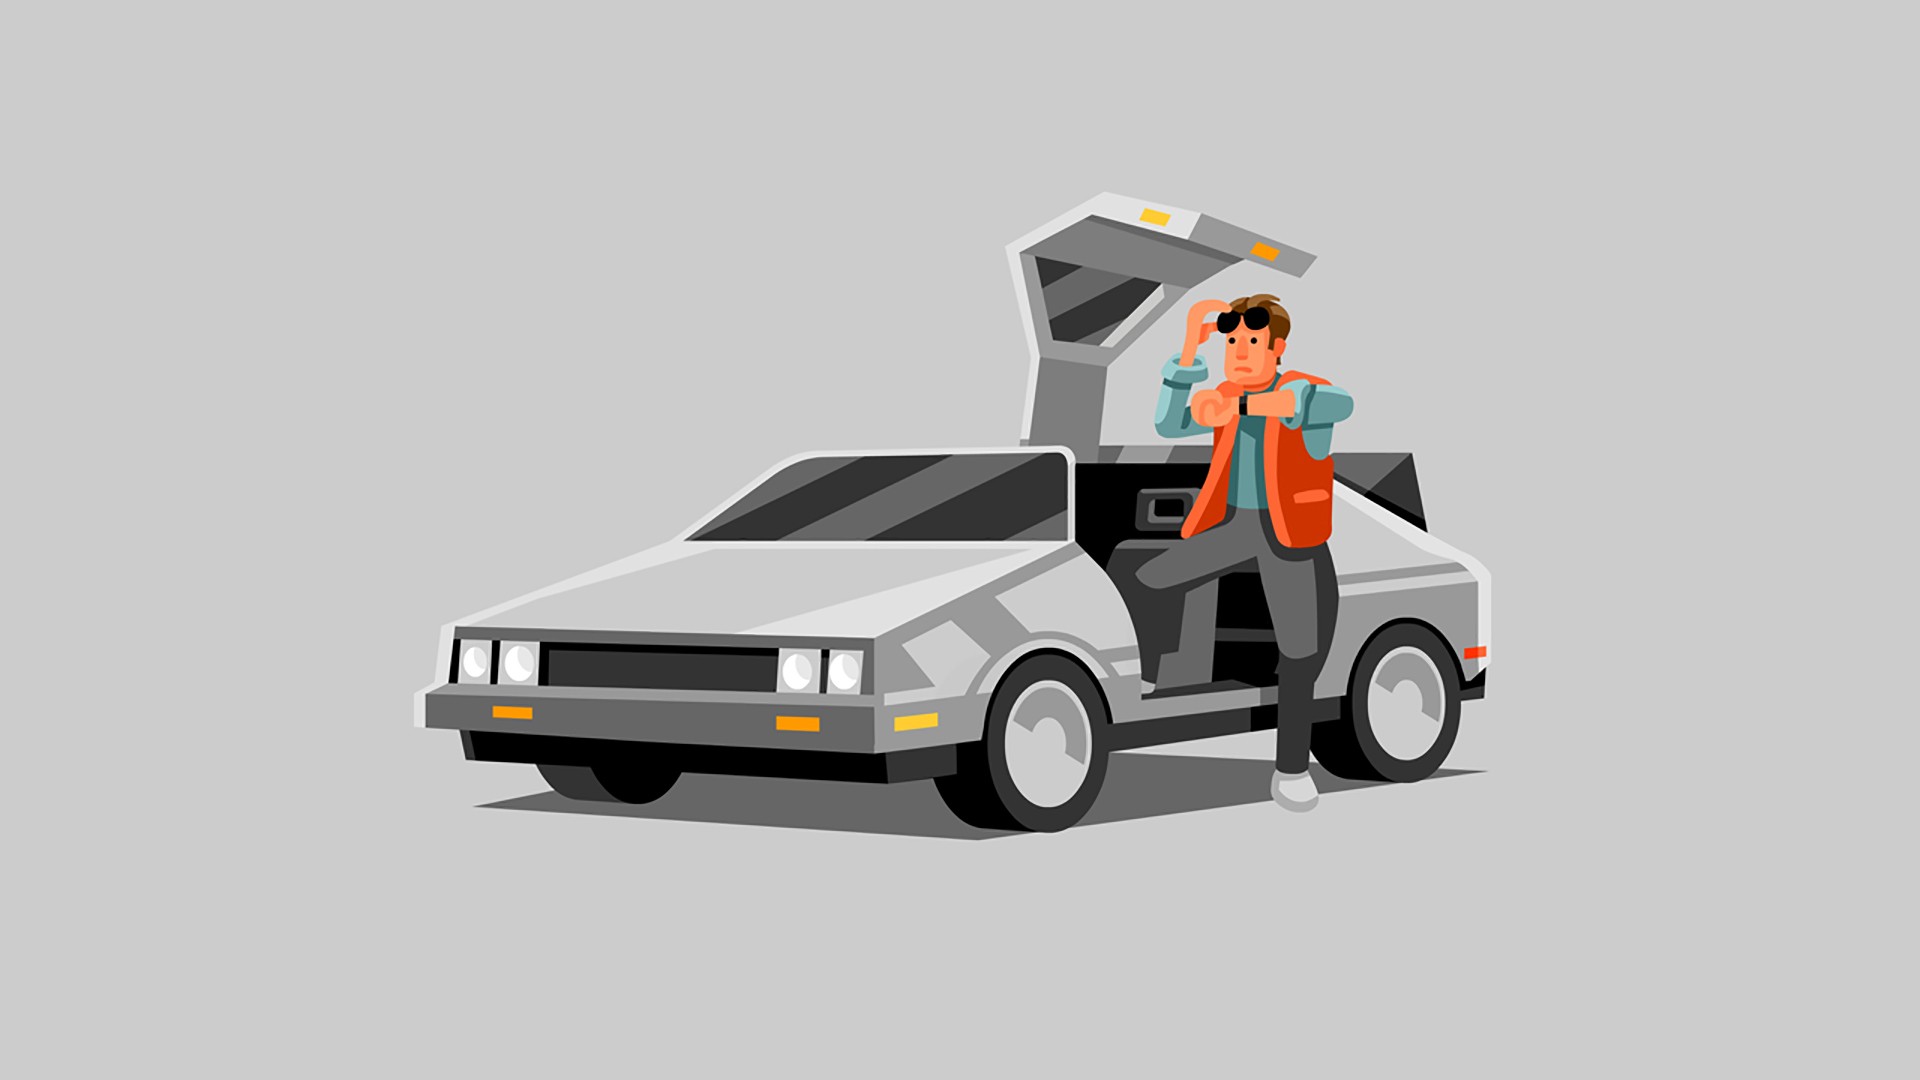 DeLorean Back To The Future Movies Time Machine Marty McFly Artwork Car Vehicle Simple Movie Vehicle 1920x1080